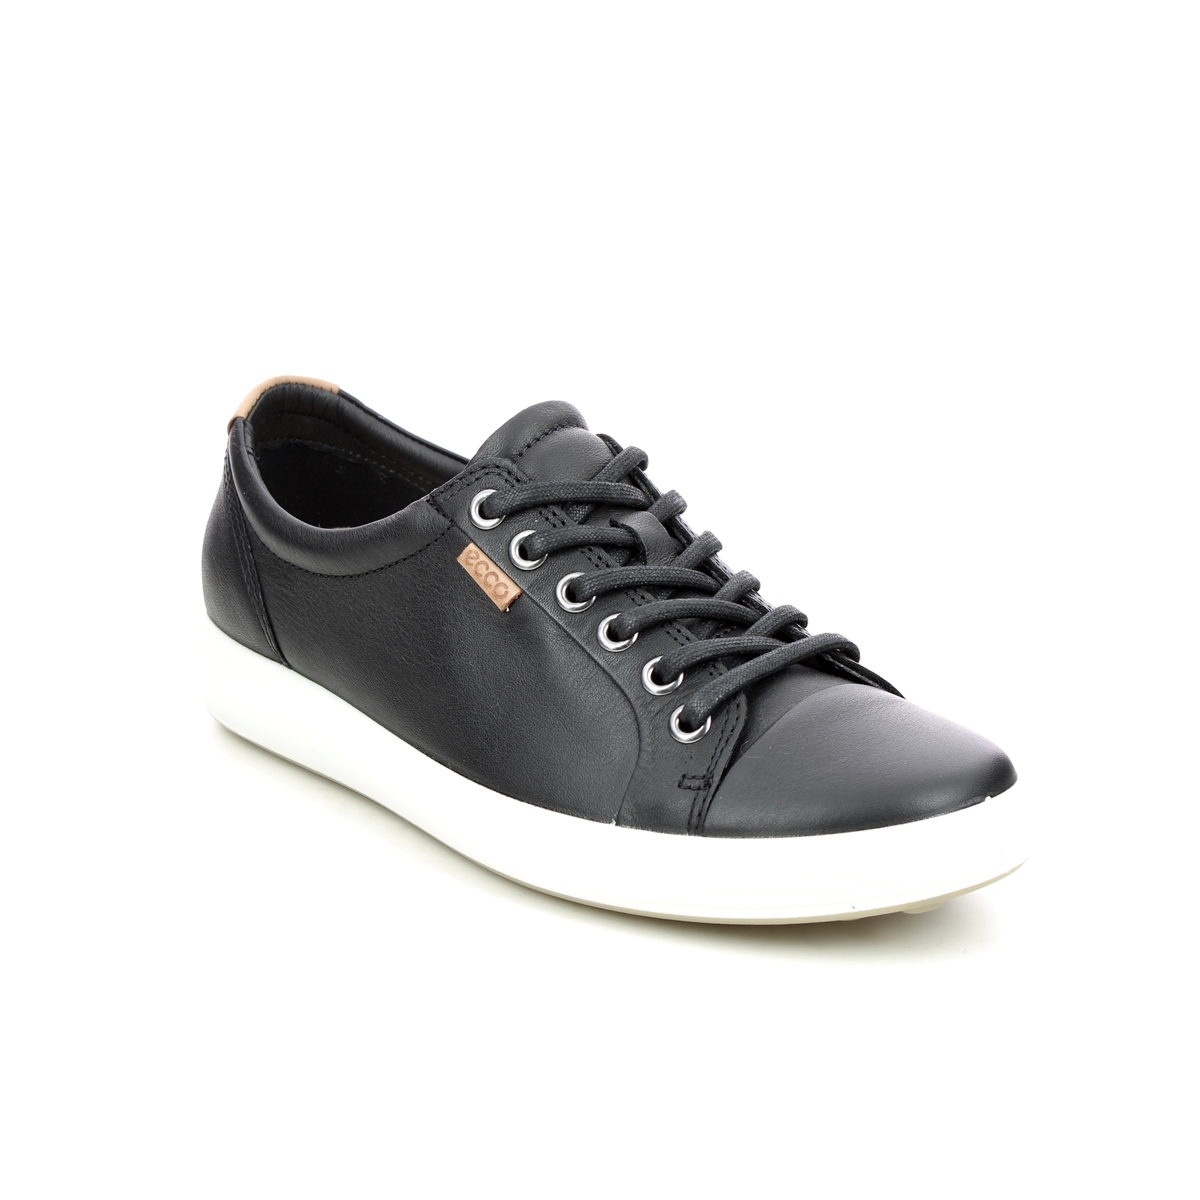 Ecco Soft 7 Lace Black Leather Womens Trainers 430003-01001 In Size 36 In Plain Black Leather